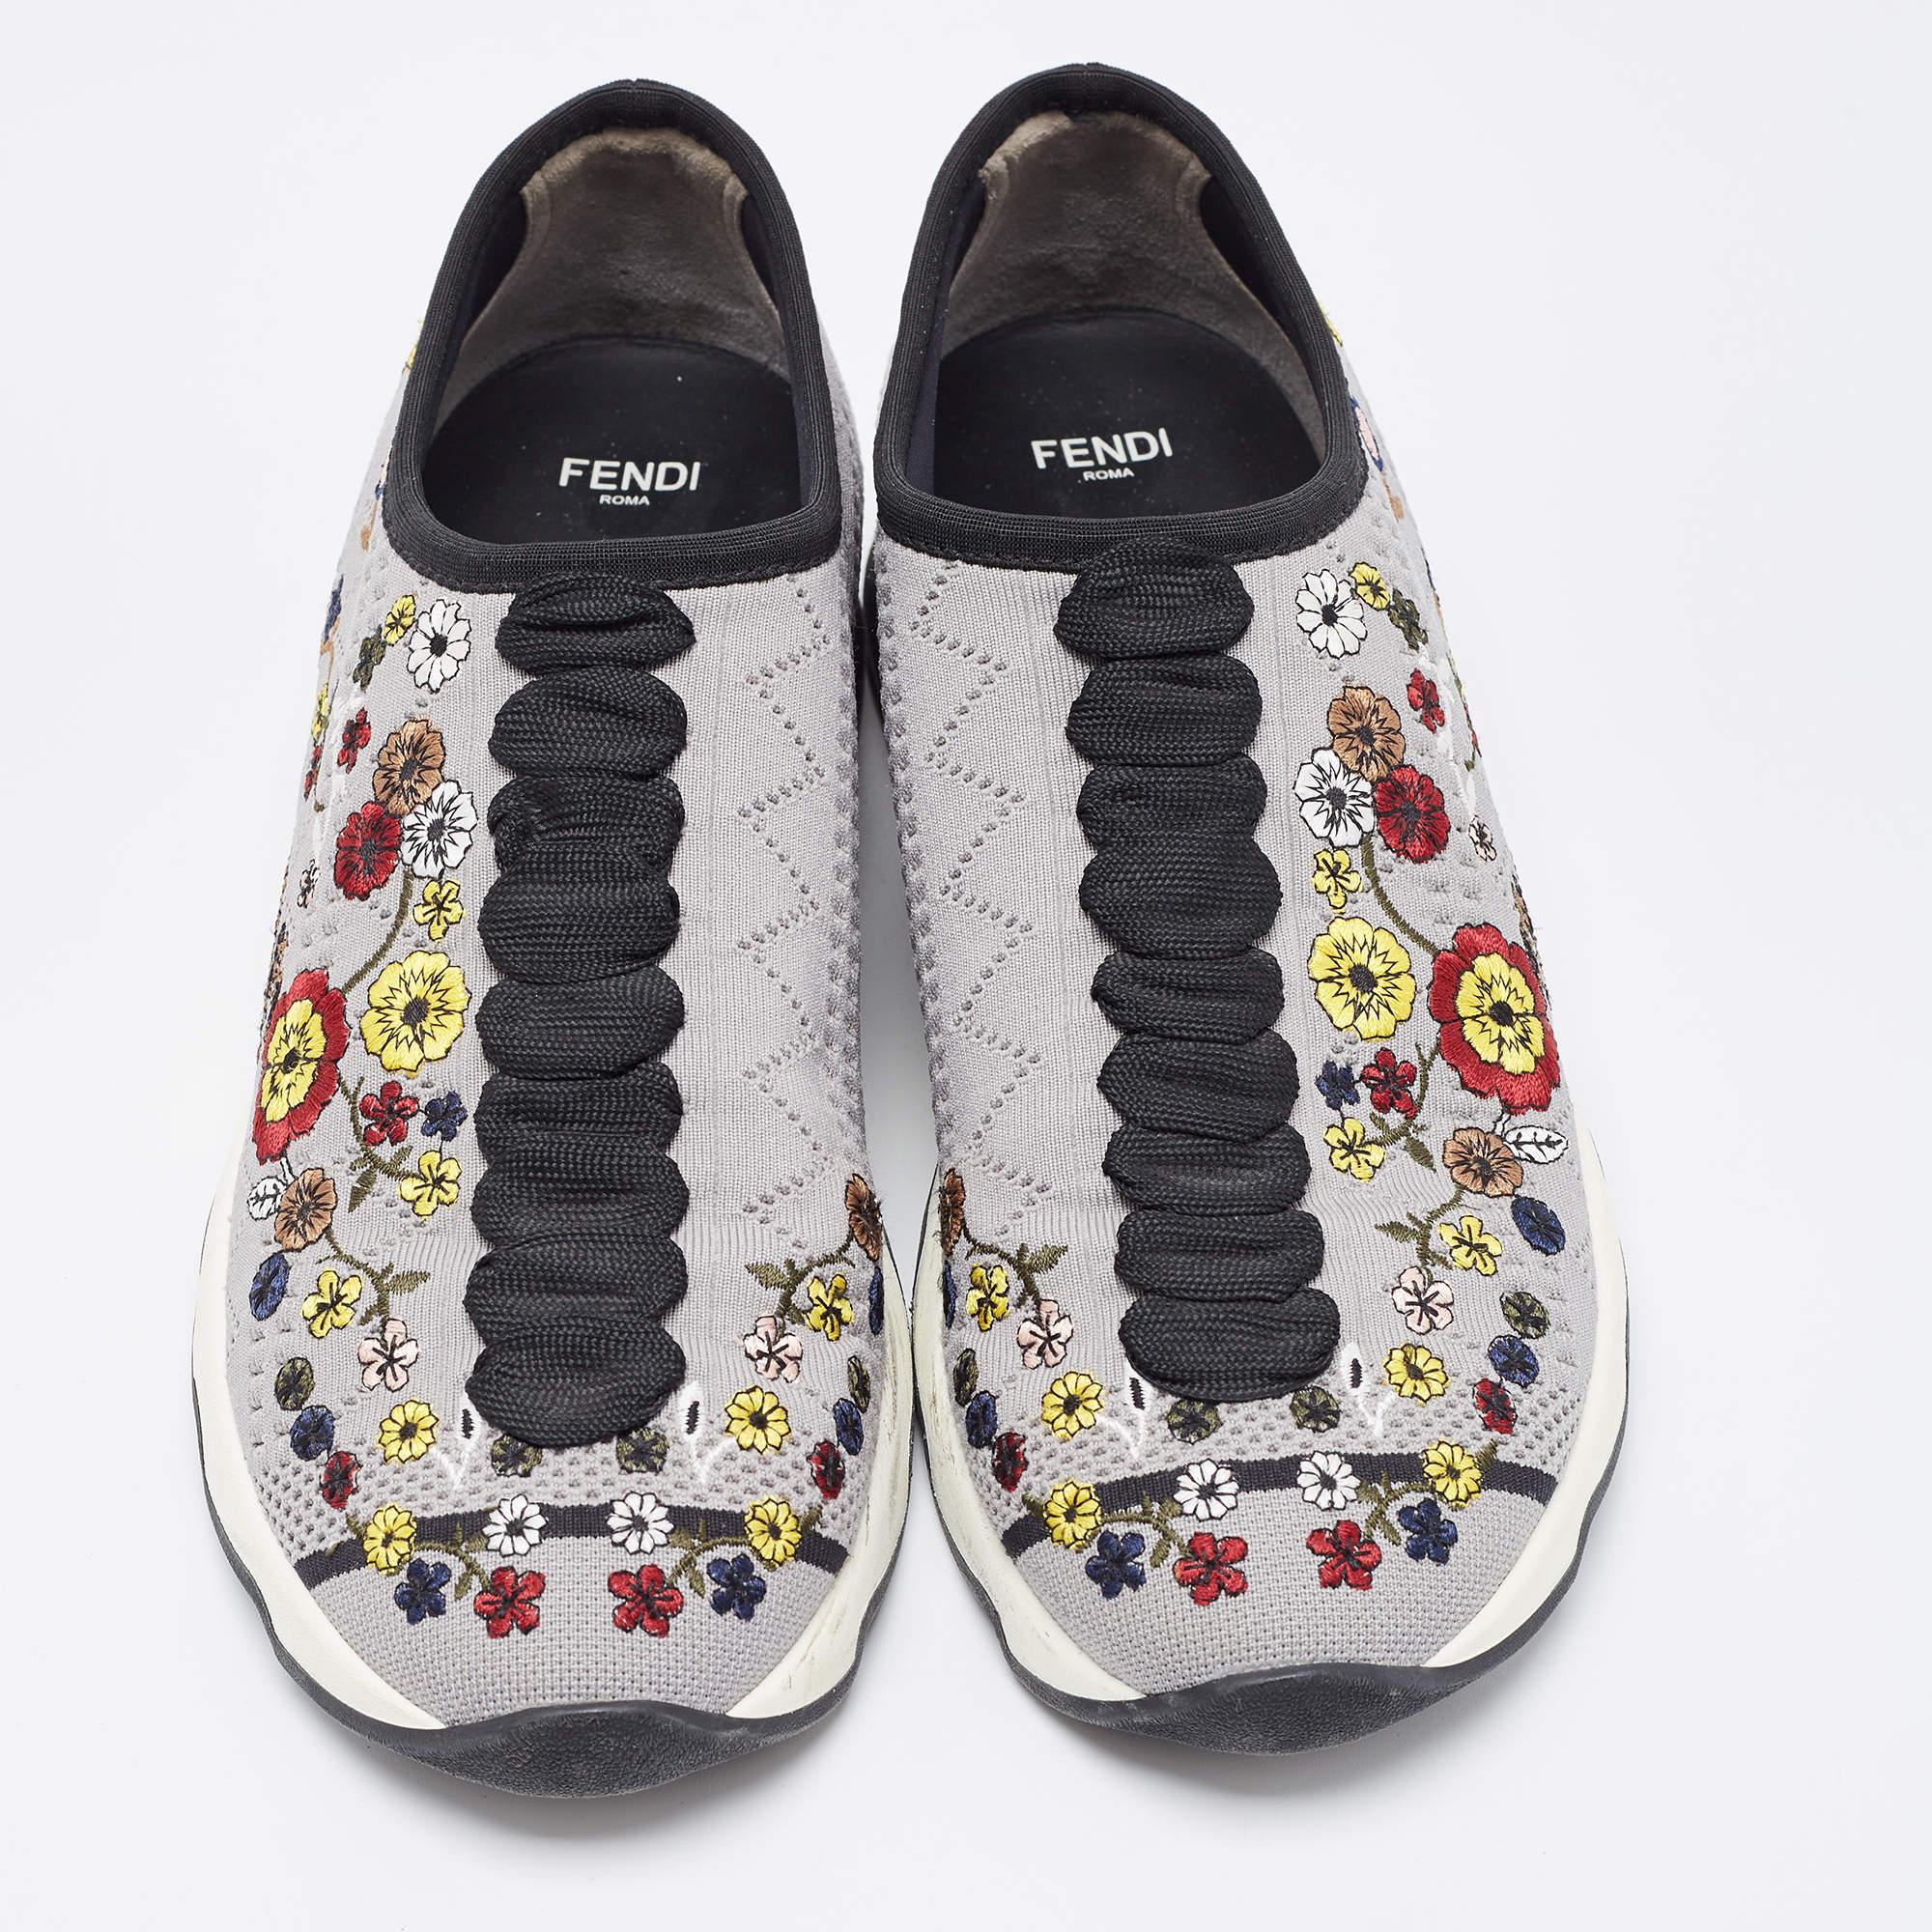 Fendi Grey Floral Embroidered Knit Fabric Slip On Sneakers Size 38 In Good Condition For Sale In Dubai, Al Qouz 2